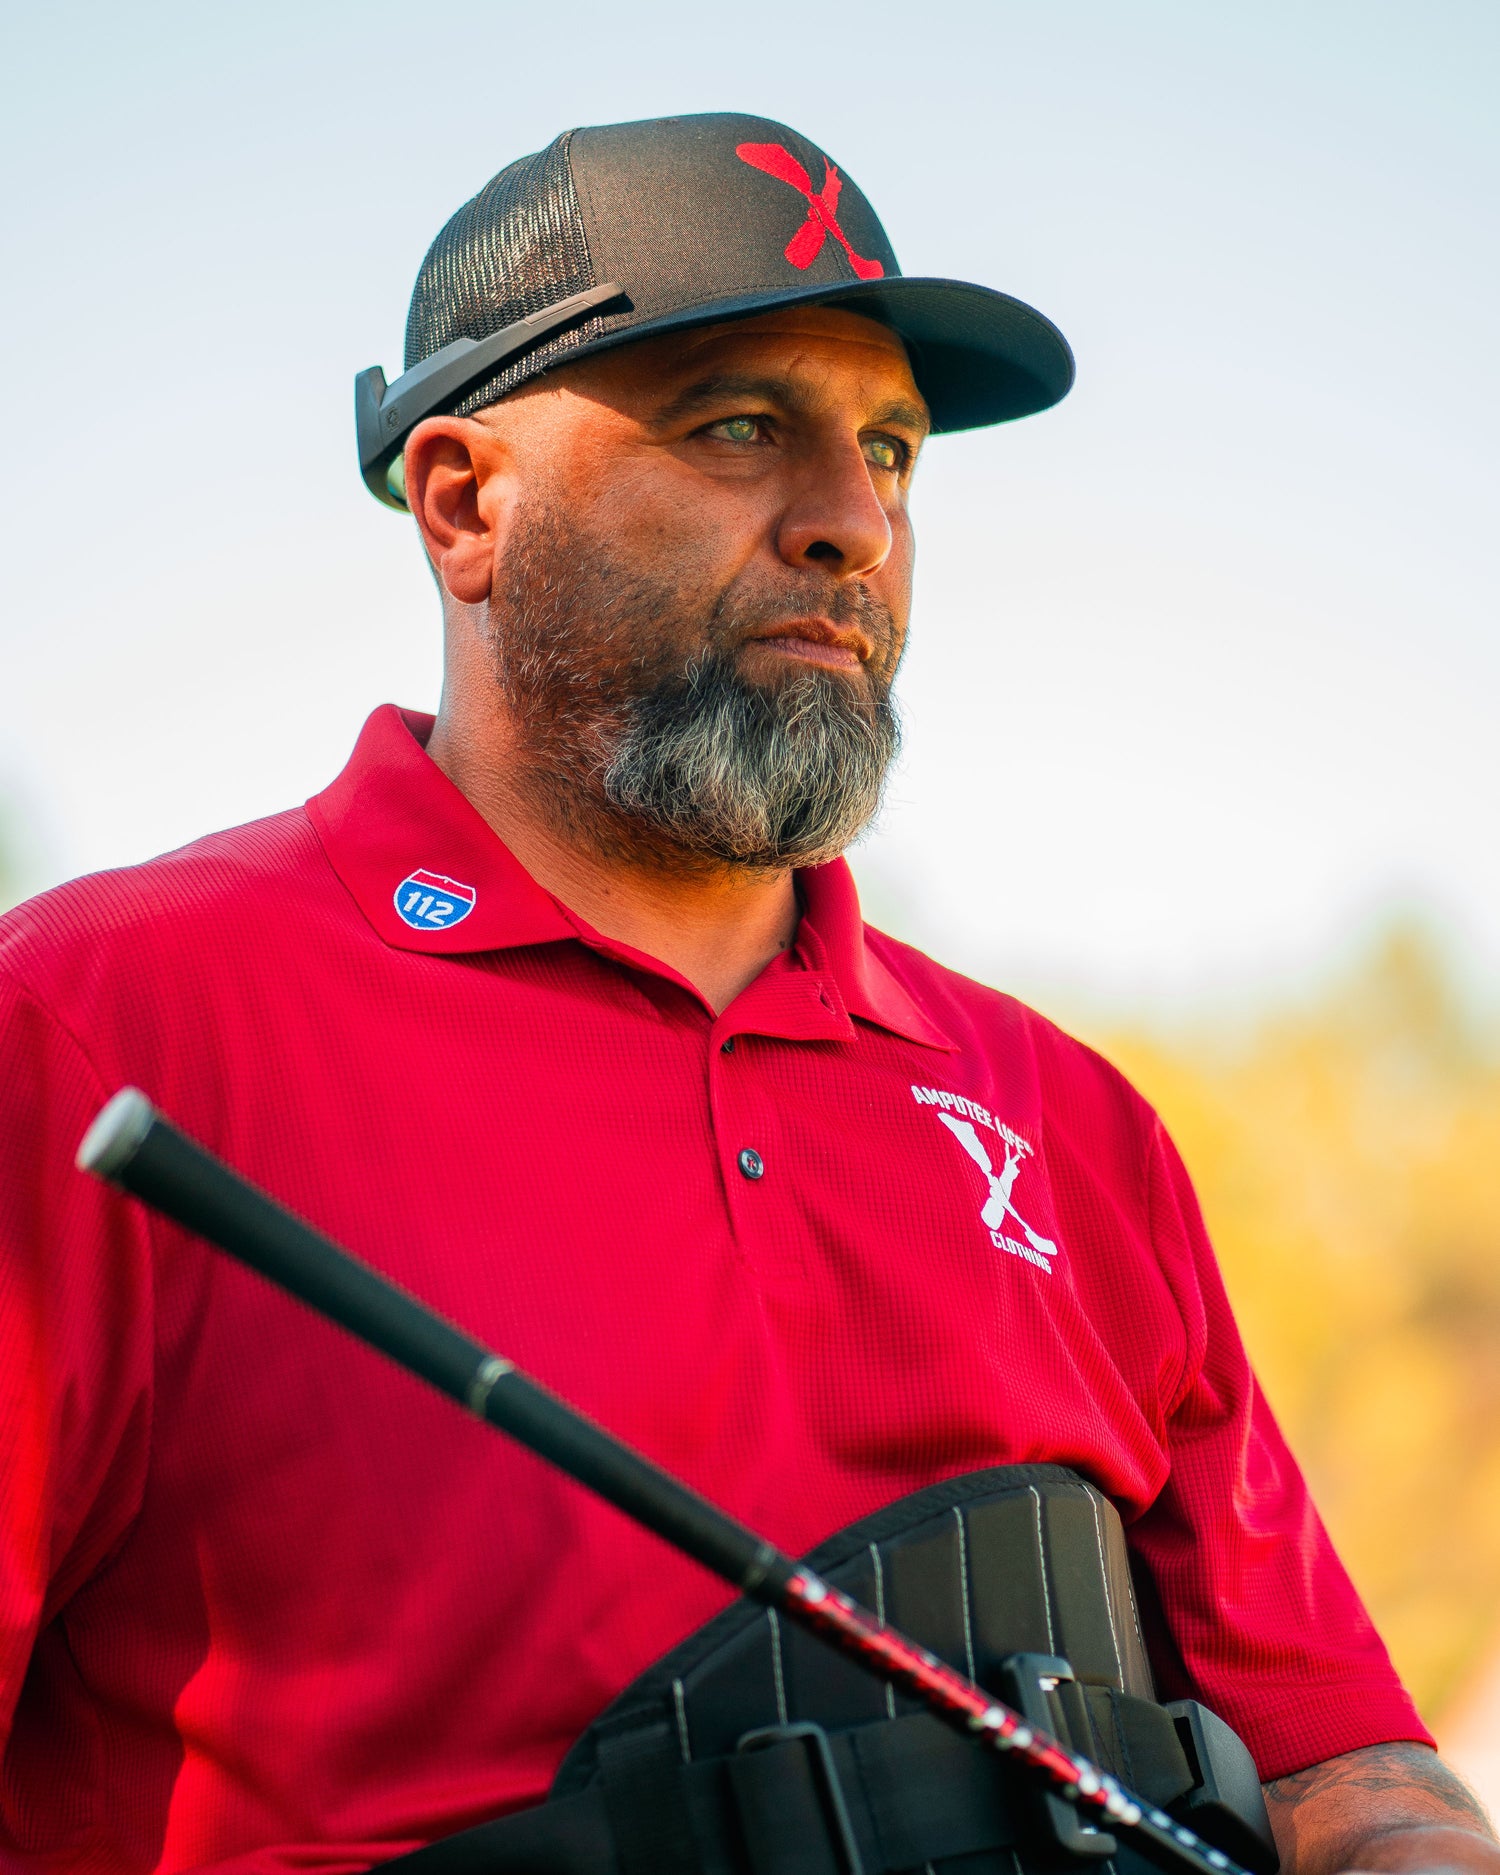 Portrait of Amplife® Foundation & Amplife® Founder Abdul Nevarez as he gets ready to hit his golf shot